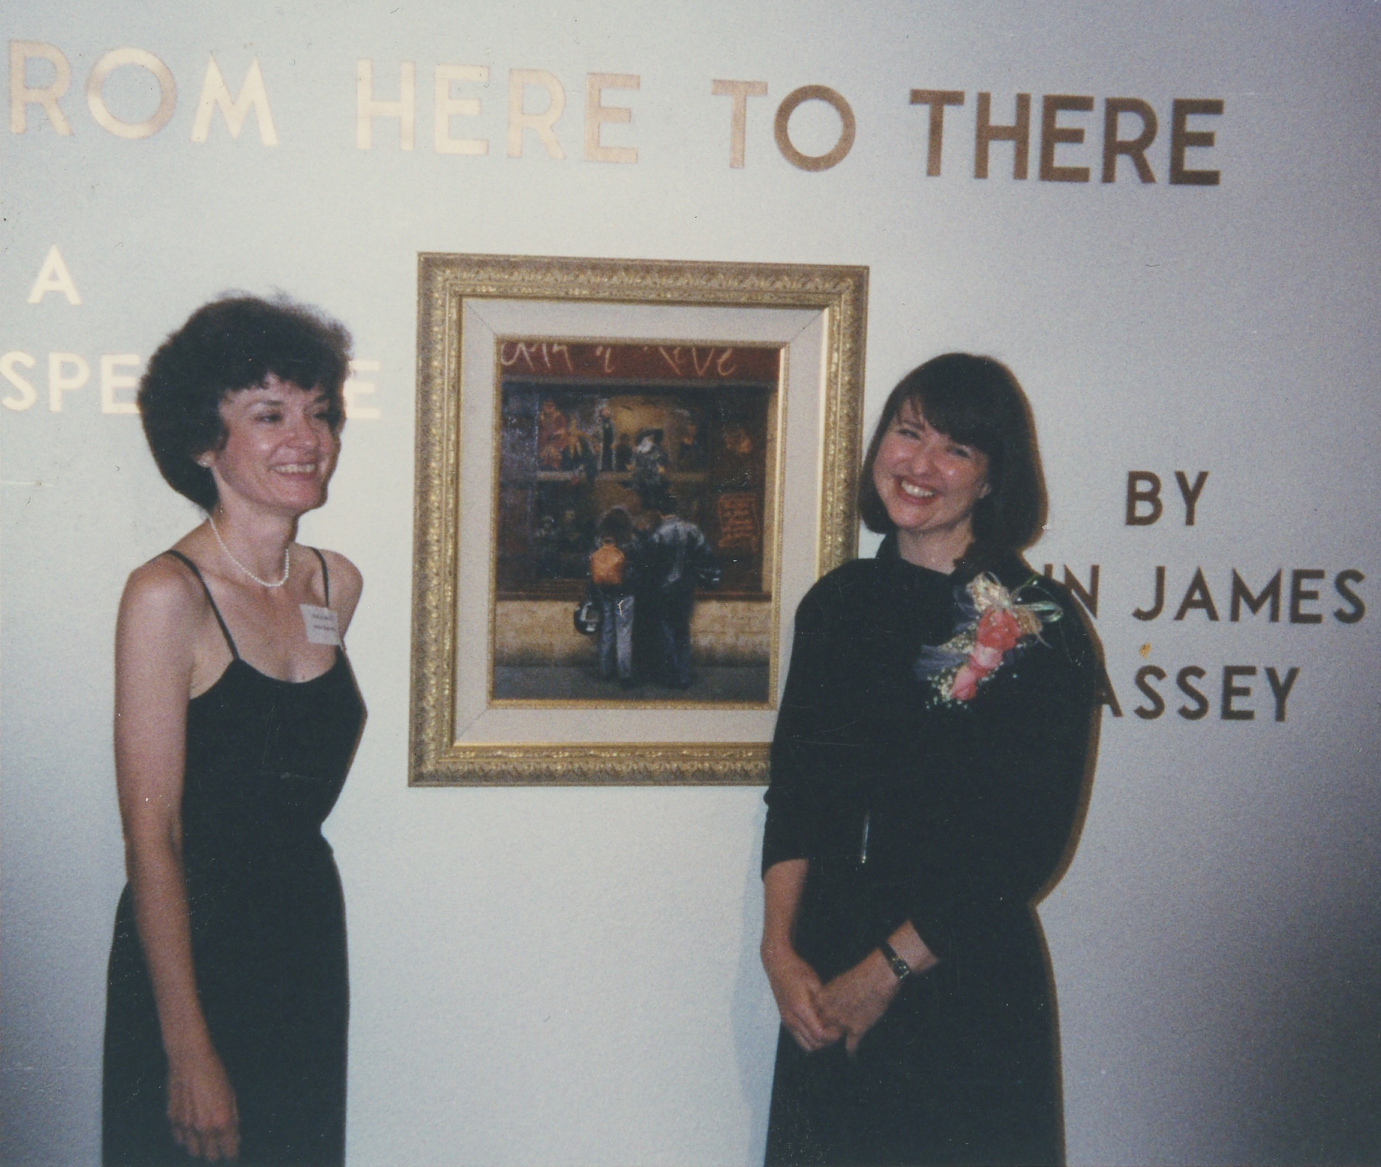 Holly Denny of the Wyler Gallery with Ann James Massey.
From Here to There, a retrospective of 26 years of drawings and paintings by Ann James Massey at the Chamizal National Memorial